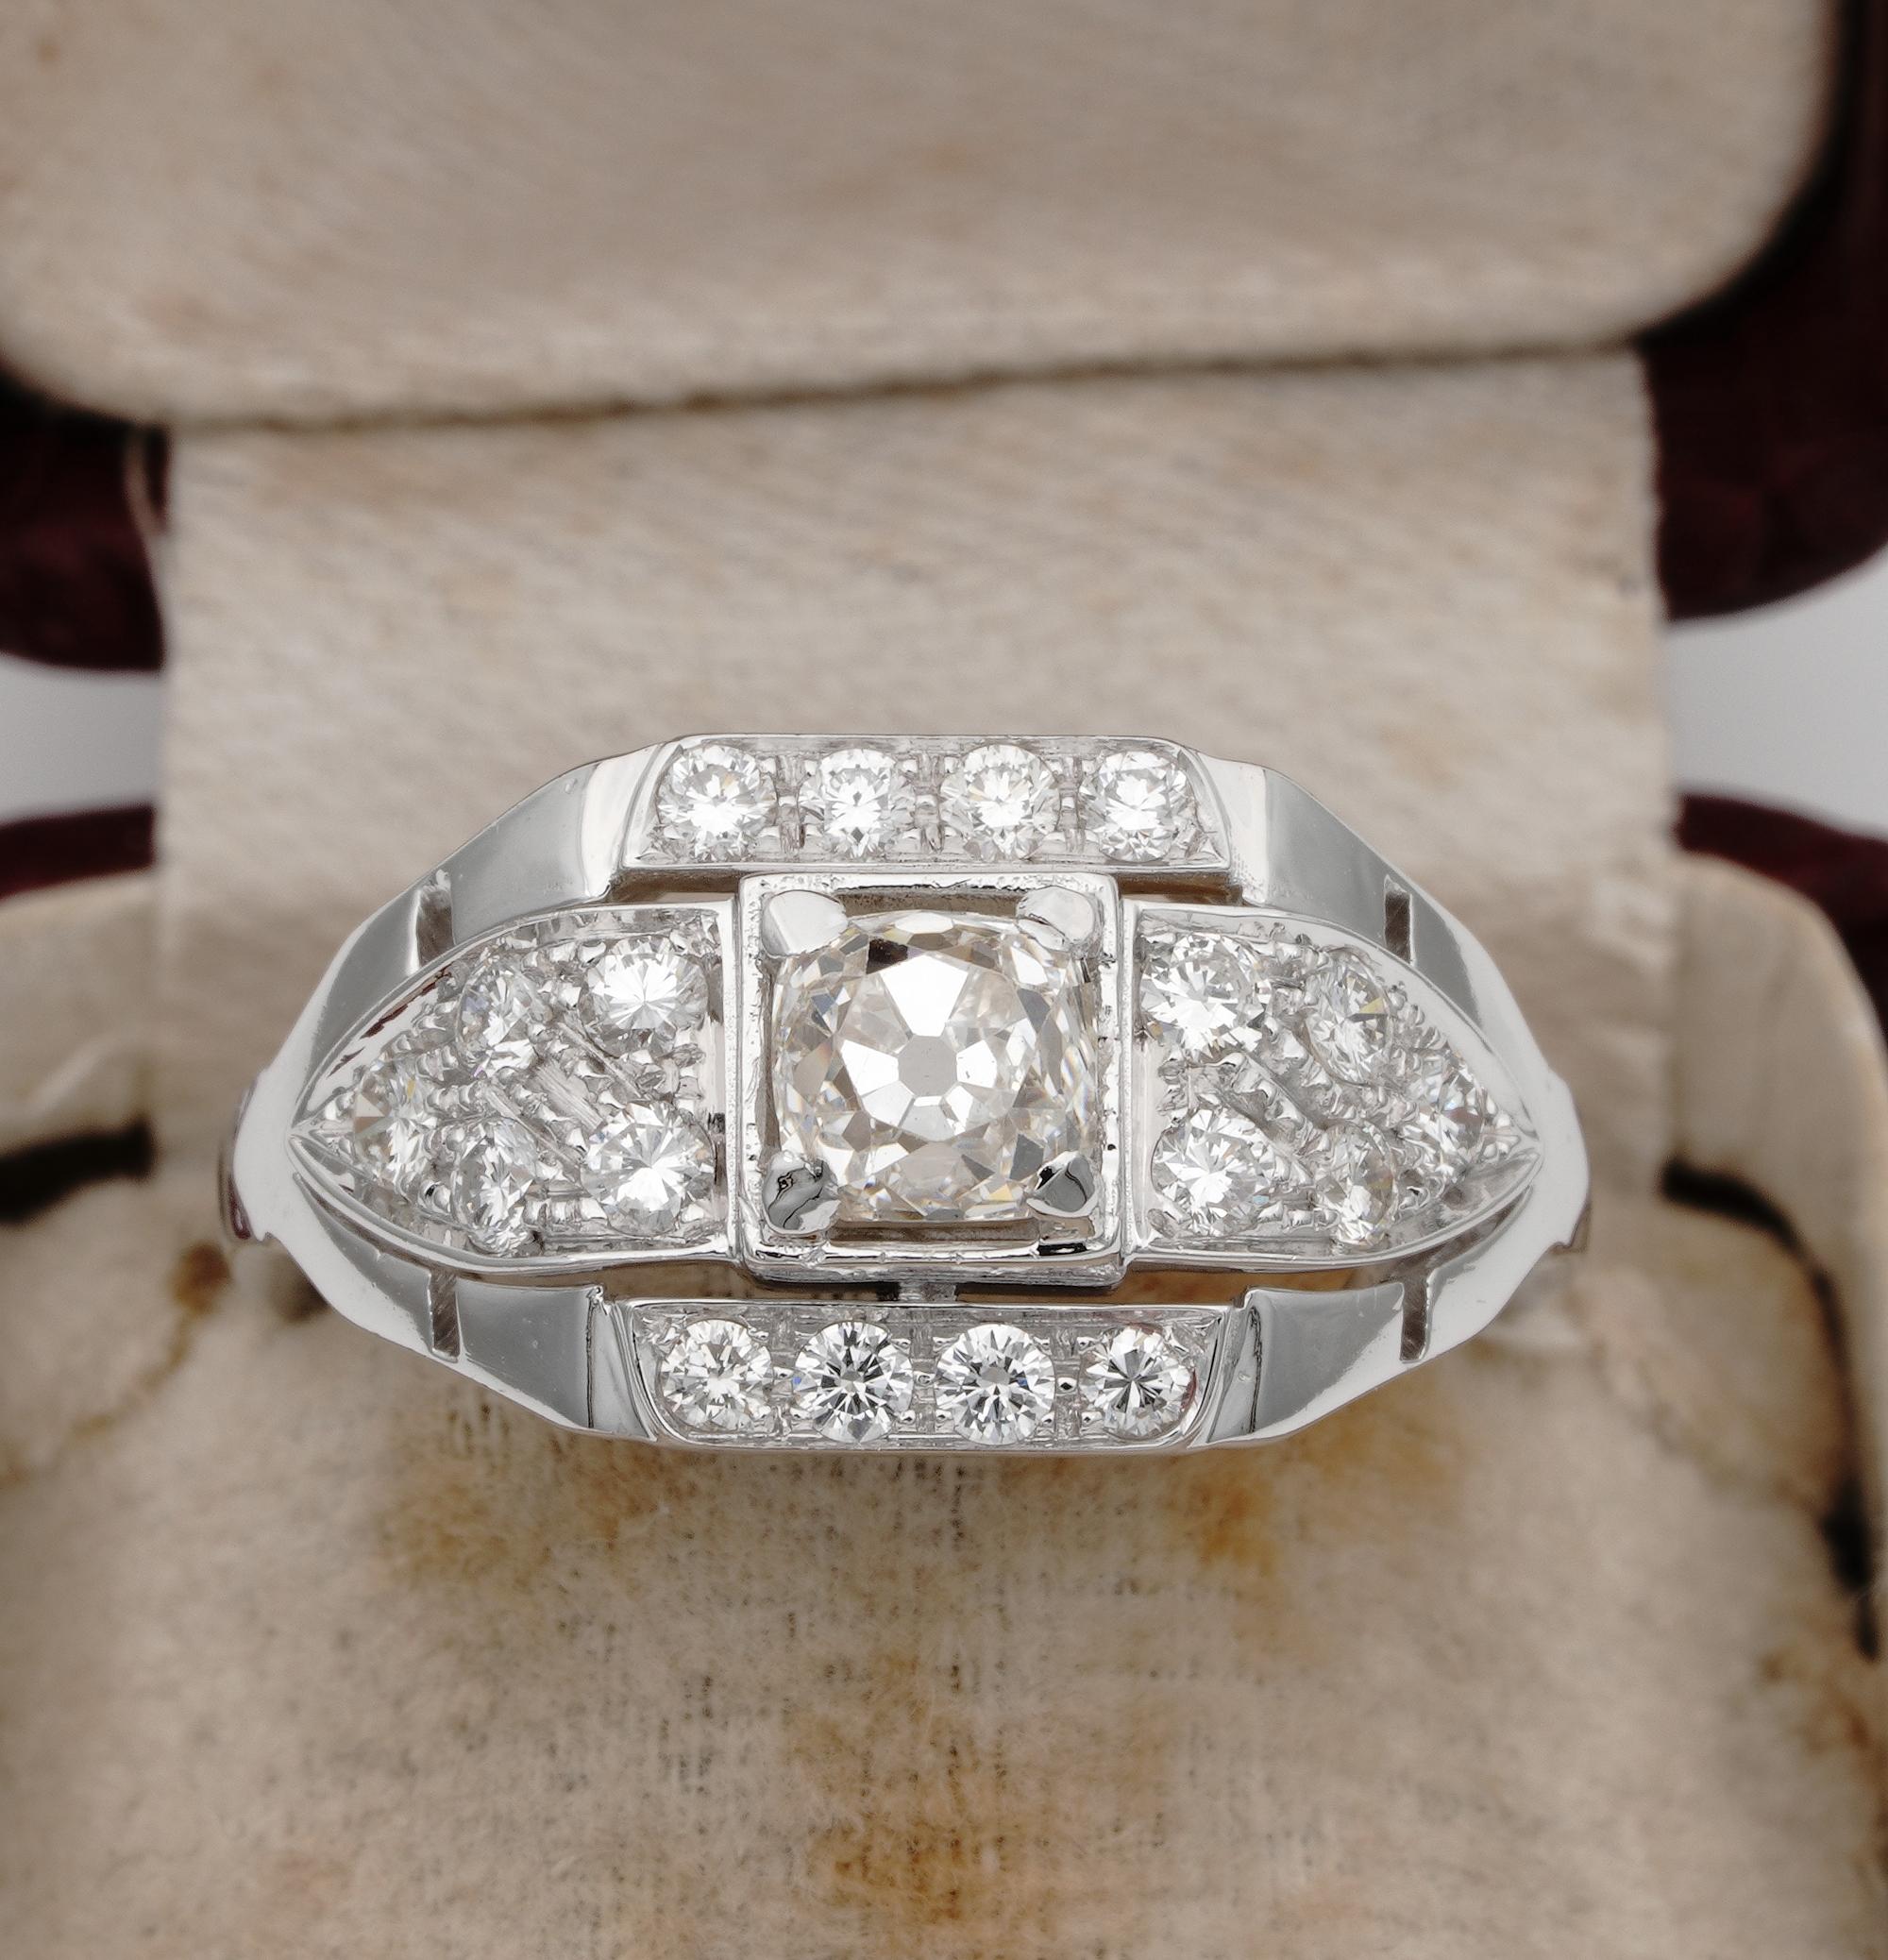 Art Deco Diamond solitaire ring, 1935 ca
Hand crafted of solid 18 KT white gold, marked
Beautiful geometric sturdy design overwhelmed by Diamonds
A centre . 85 CT old mine cut Diamond  weighted .85 Ct off mounting – diamond is rated as H/I VS – more